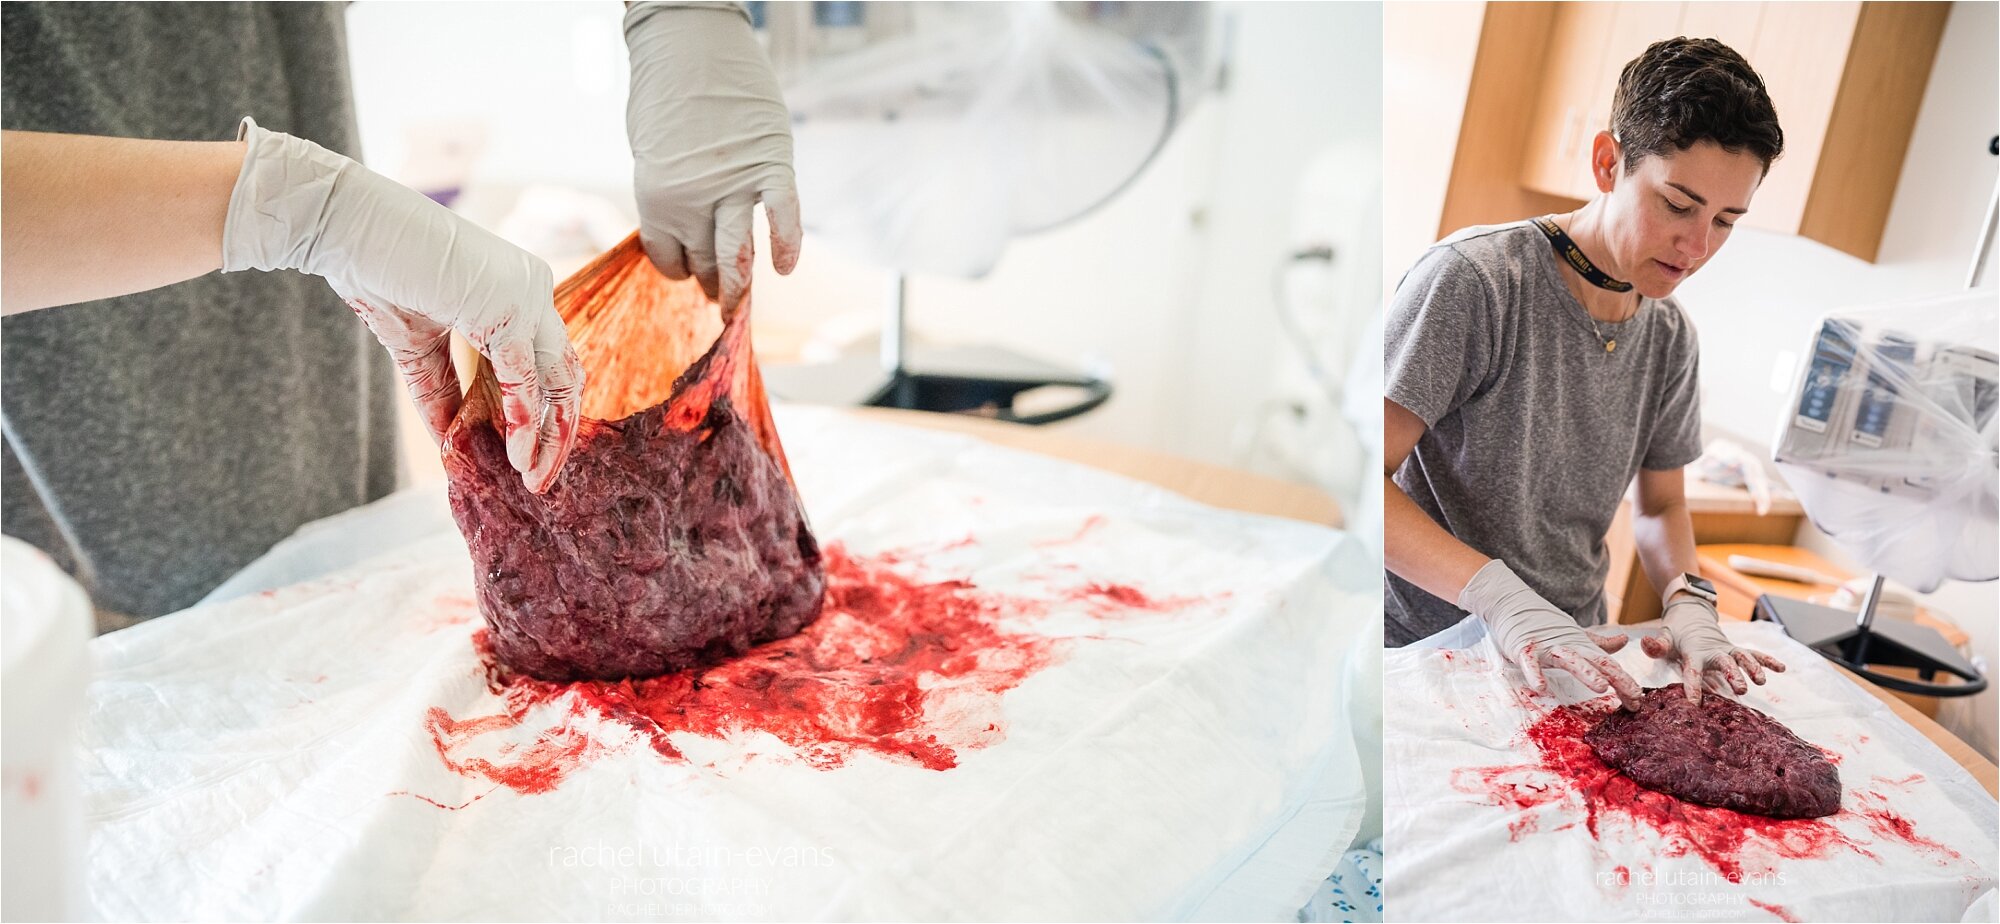 Midwife examines amniotic sac, mother's and baby's sides of the placenta, Philadelphia Birth Photographer